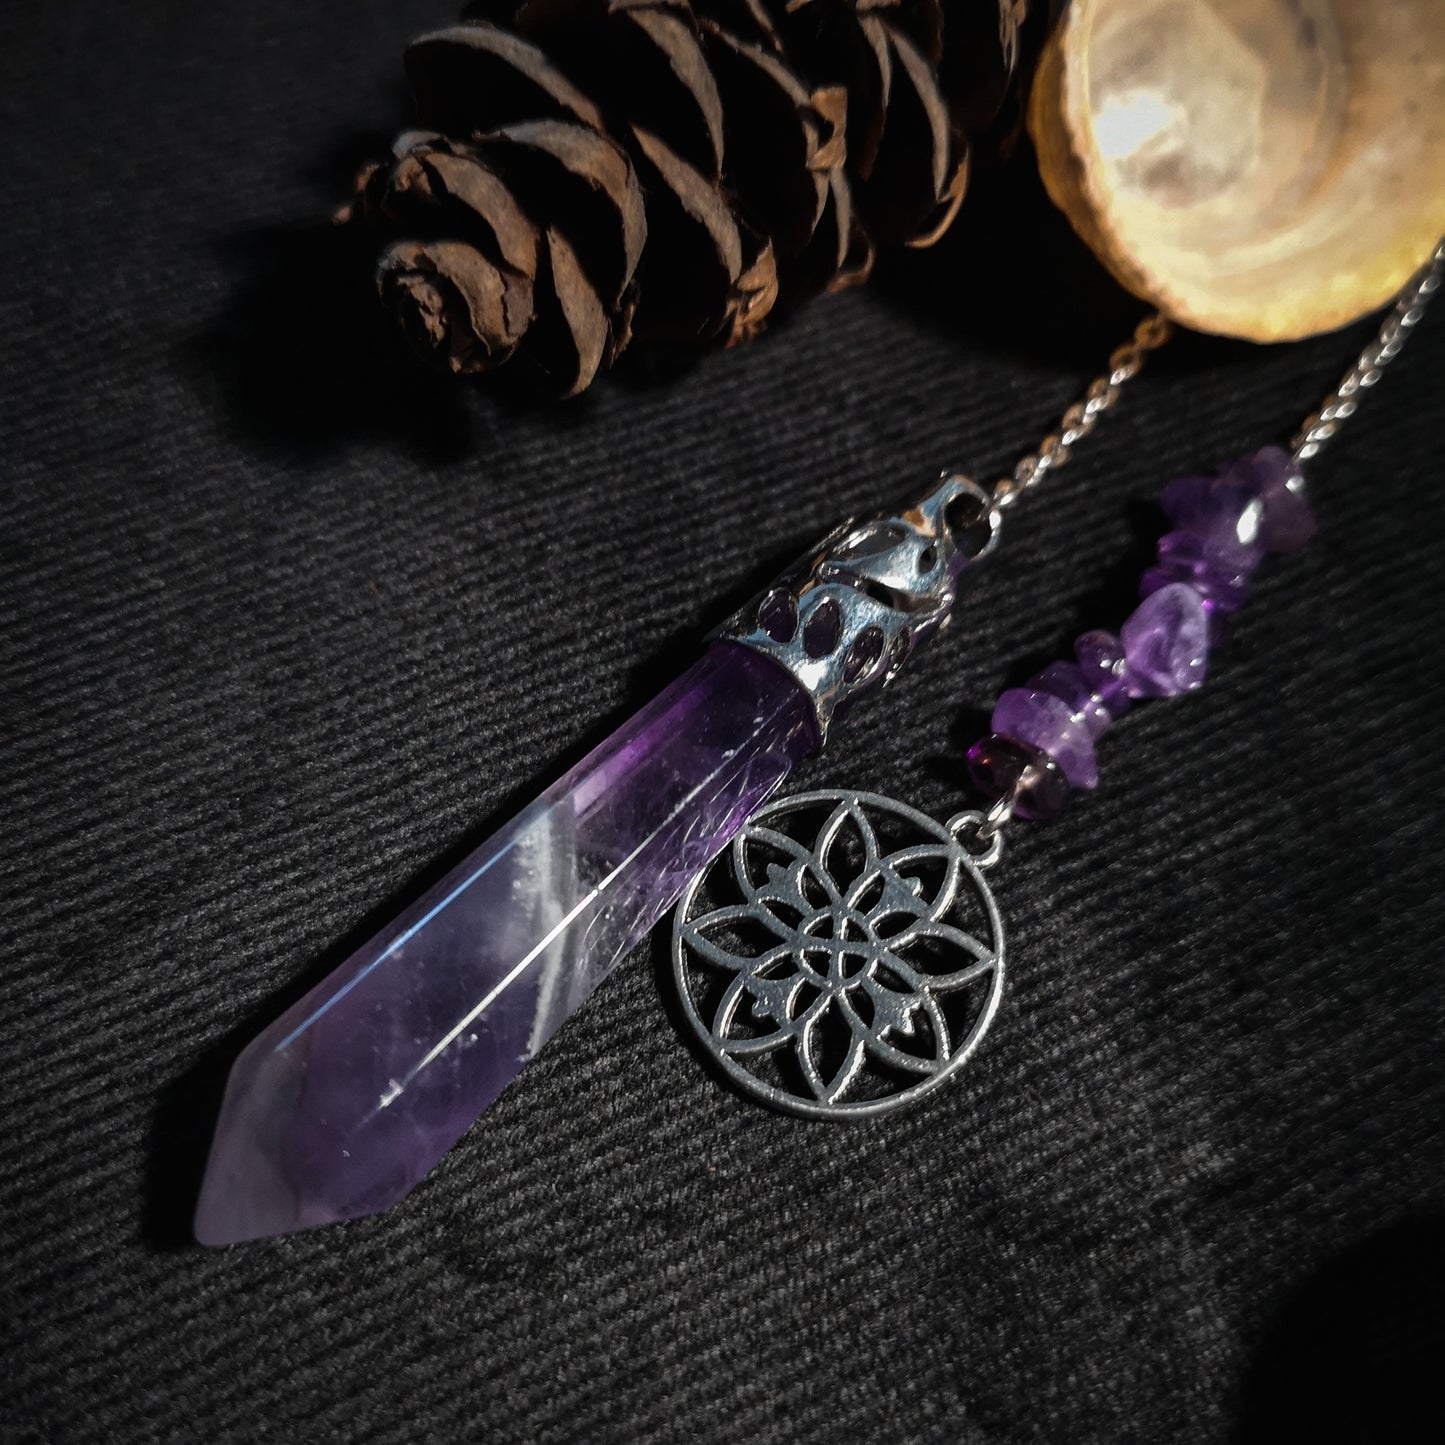 Amethyst and floral symbol pendulum - The French Witch shop